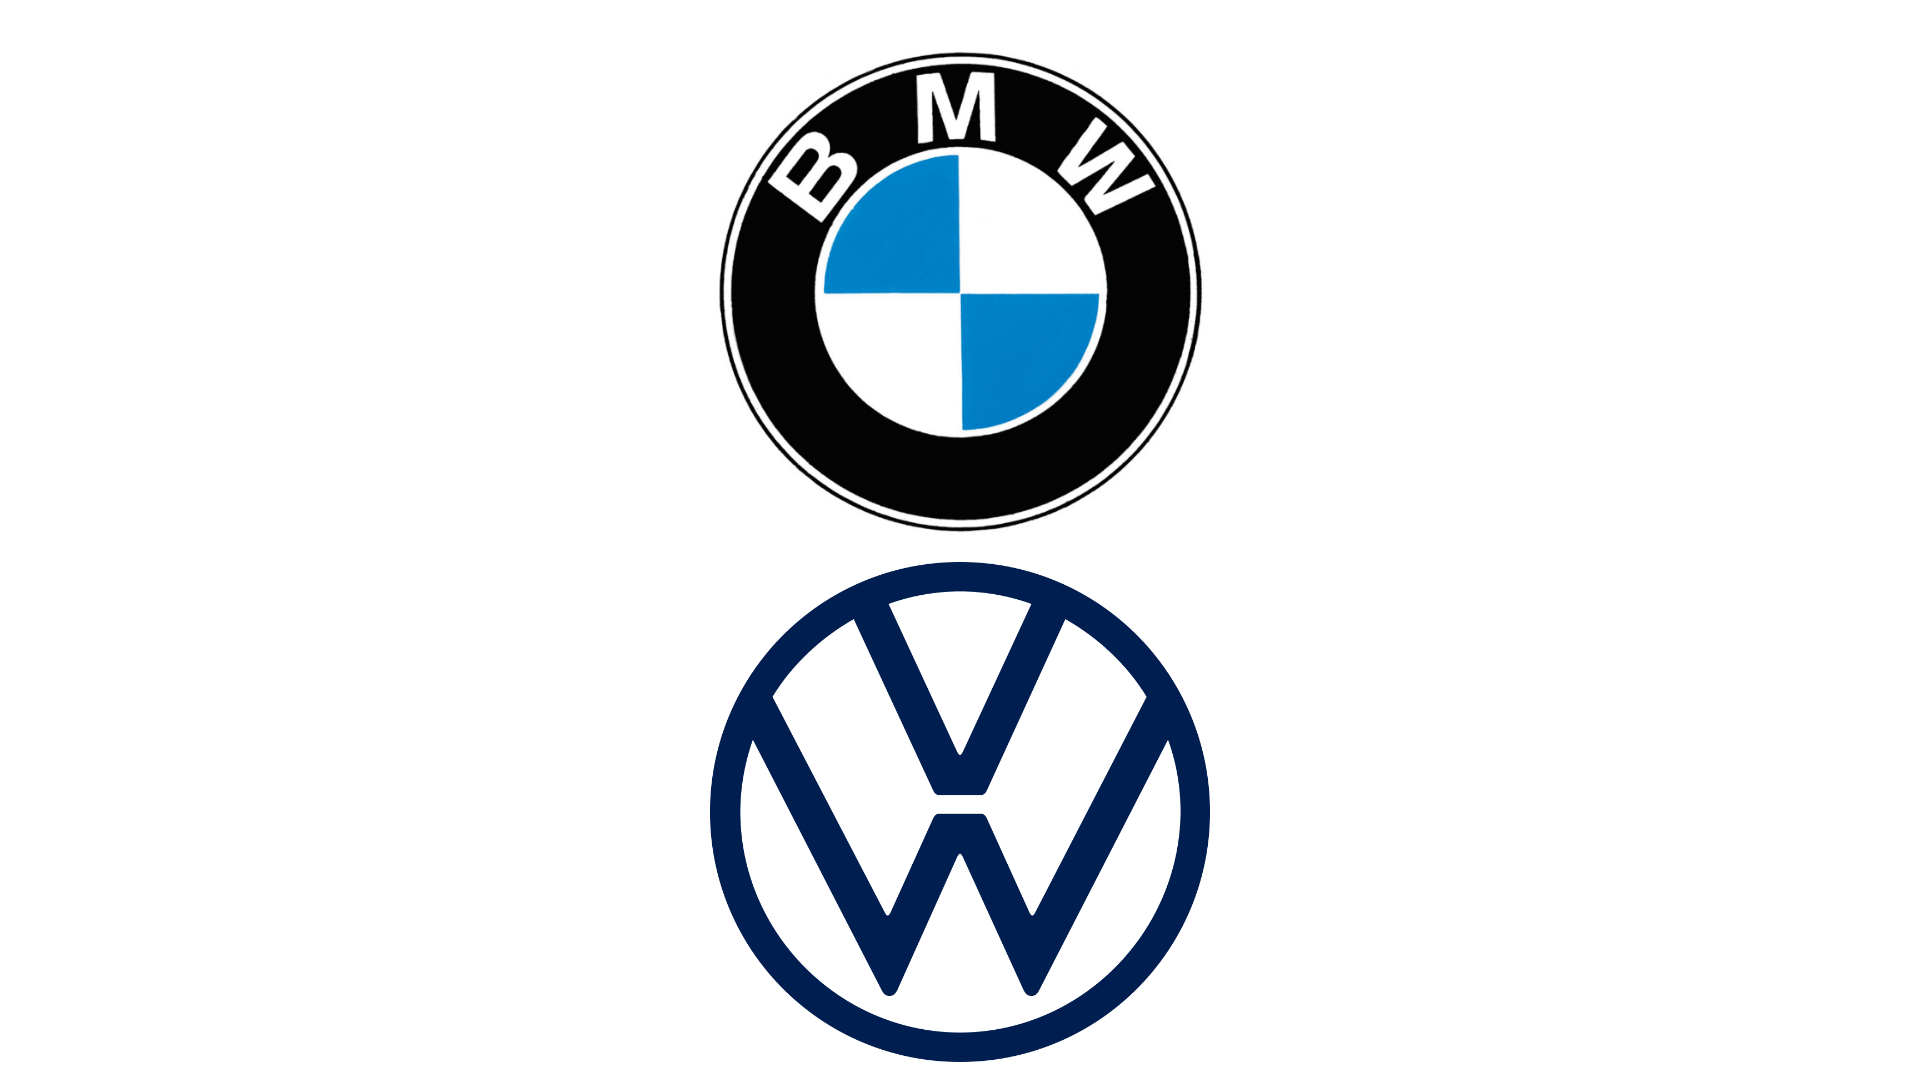 Europe Fines Volkswagen And BMW $1.36 Billion For Restricting Competition